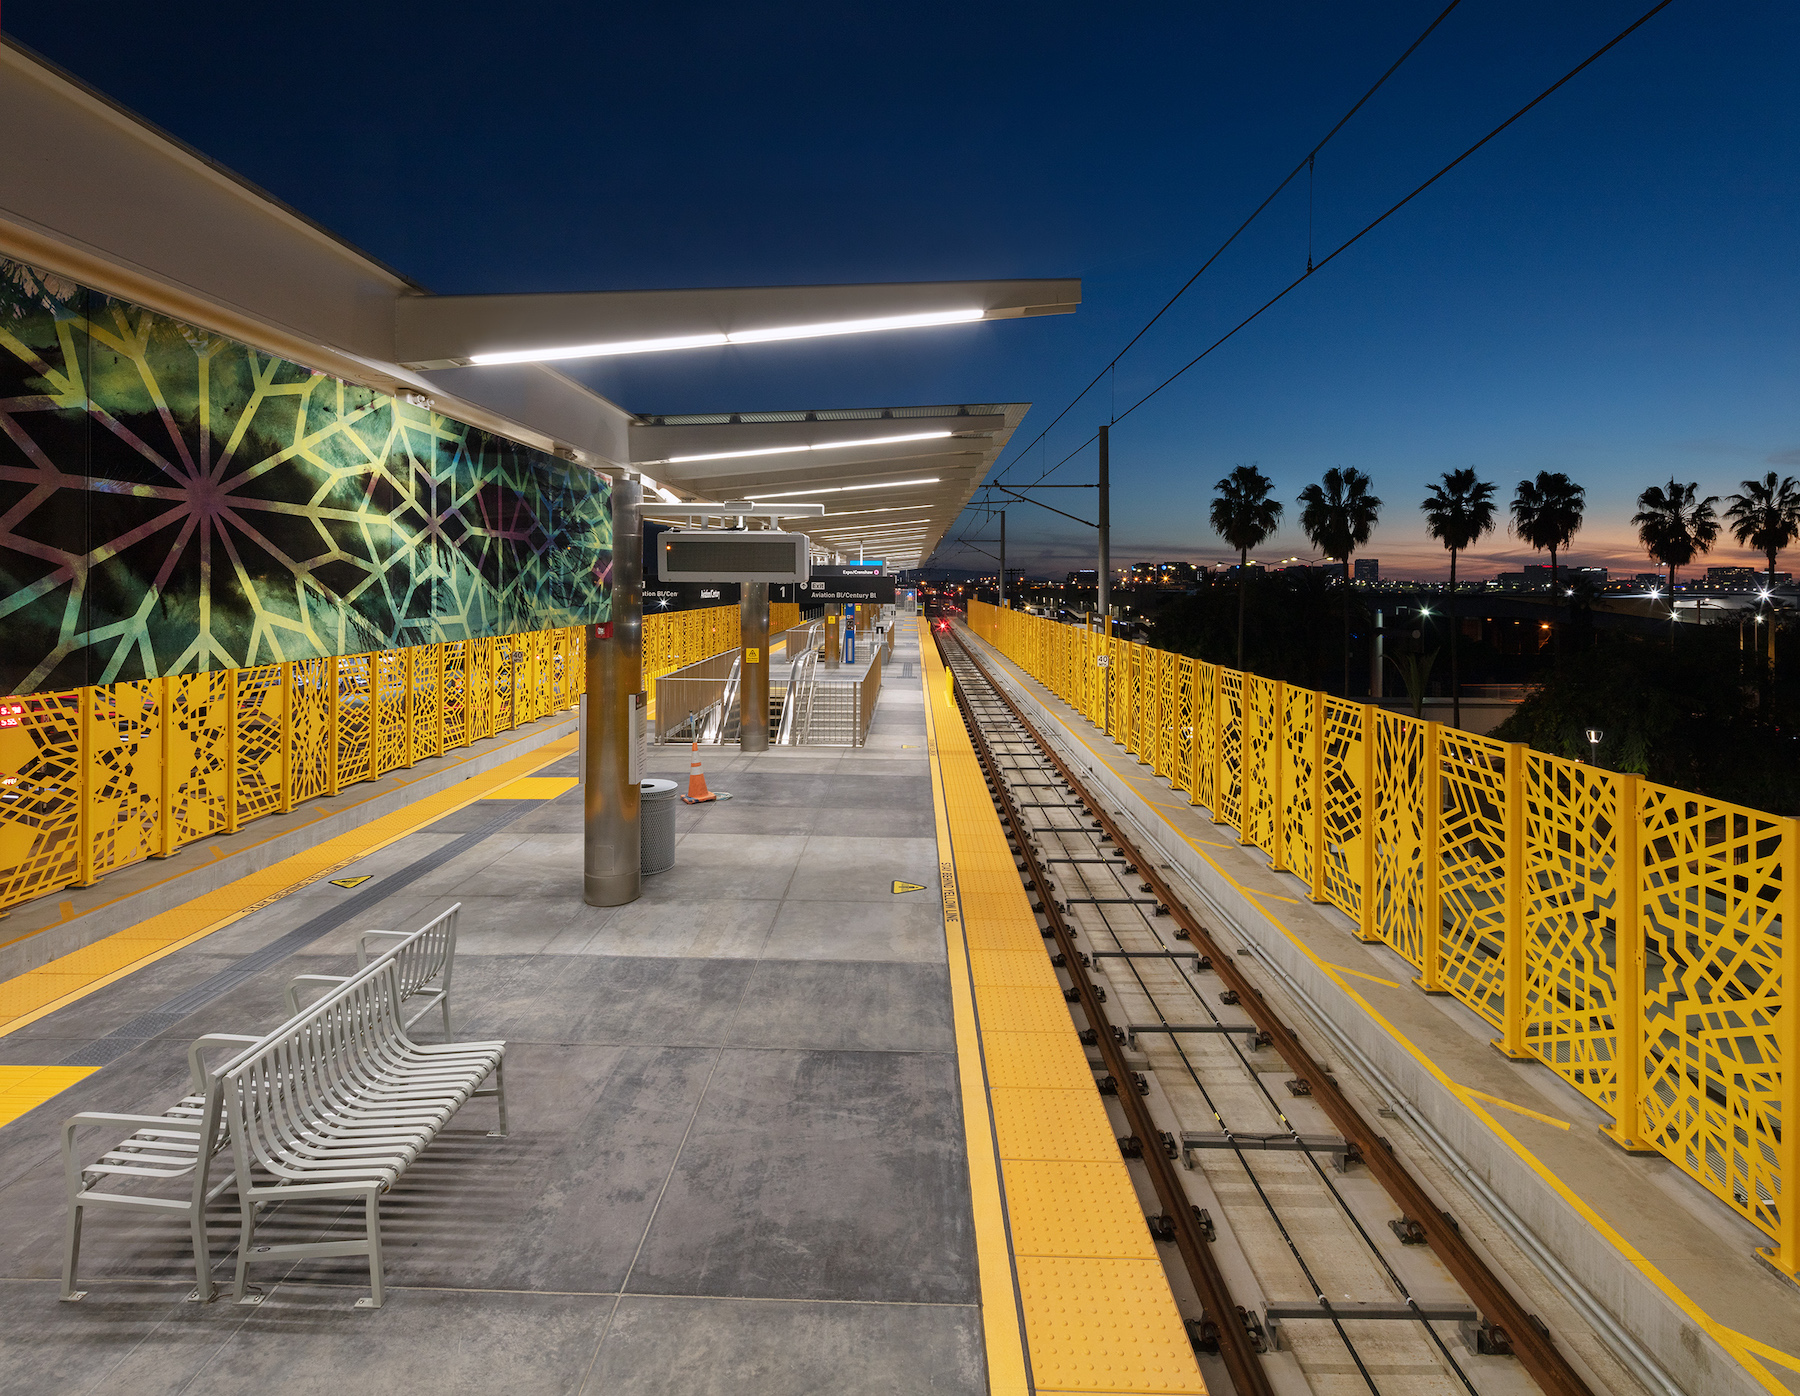 Rise, 2022, Laser cut Steel fence and Enamel murals, Public Art Commissioned by MTA Los Angeles. Aviation station, Crenshaw/LAX Line. Photo credit Panic Studio LA. Courtesy the artist.